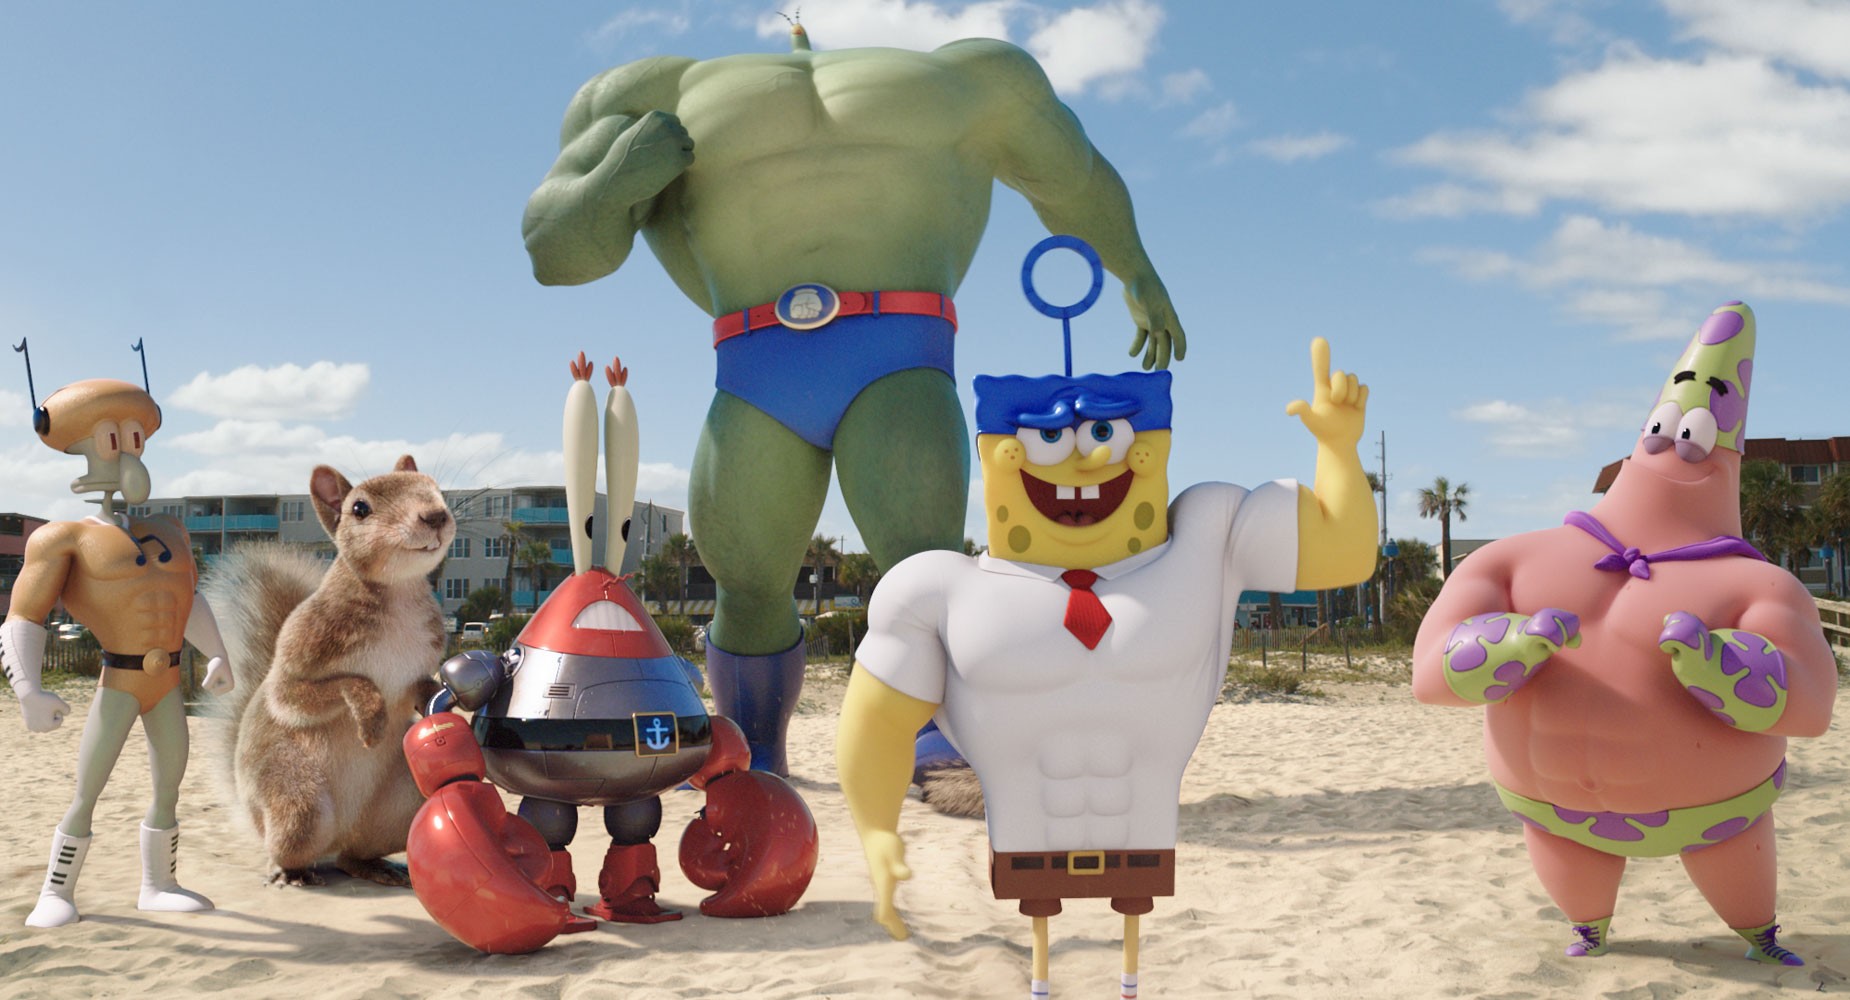 Squidward Tentacles, Sandy, Mr. Krabs, Plankton, SpongeBob SquarePants and Patrick Star in Paramount Pictures' The SpongeBob Movie: Sponge Out of Water (2015)